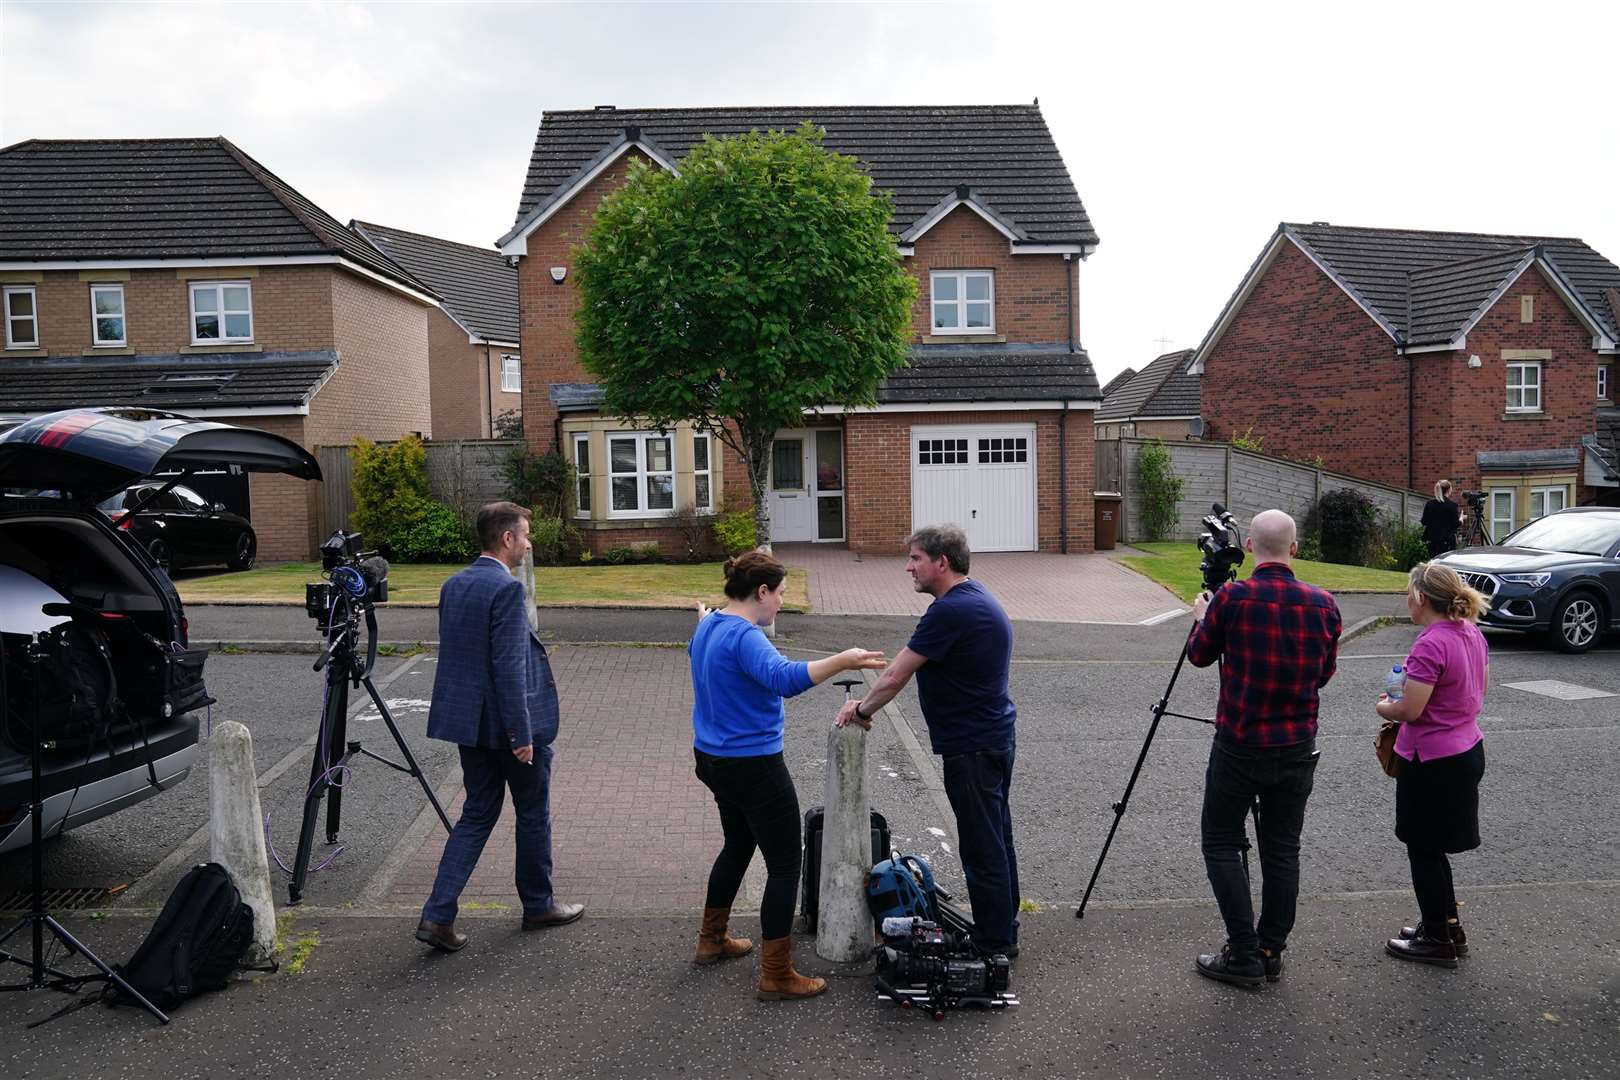 Members of the media outside former first minister of Scotland Nicola Sturgeon’s home in Uddingtson, Glasgow (Jane Barlow/PA)